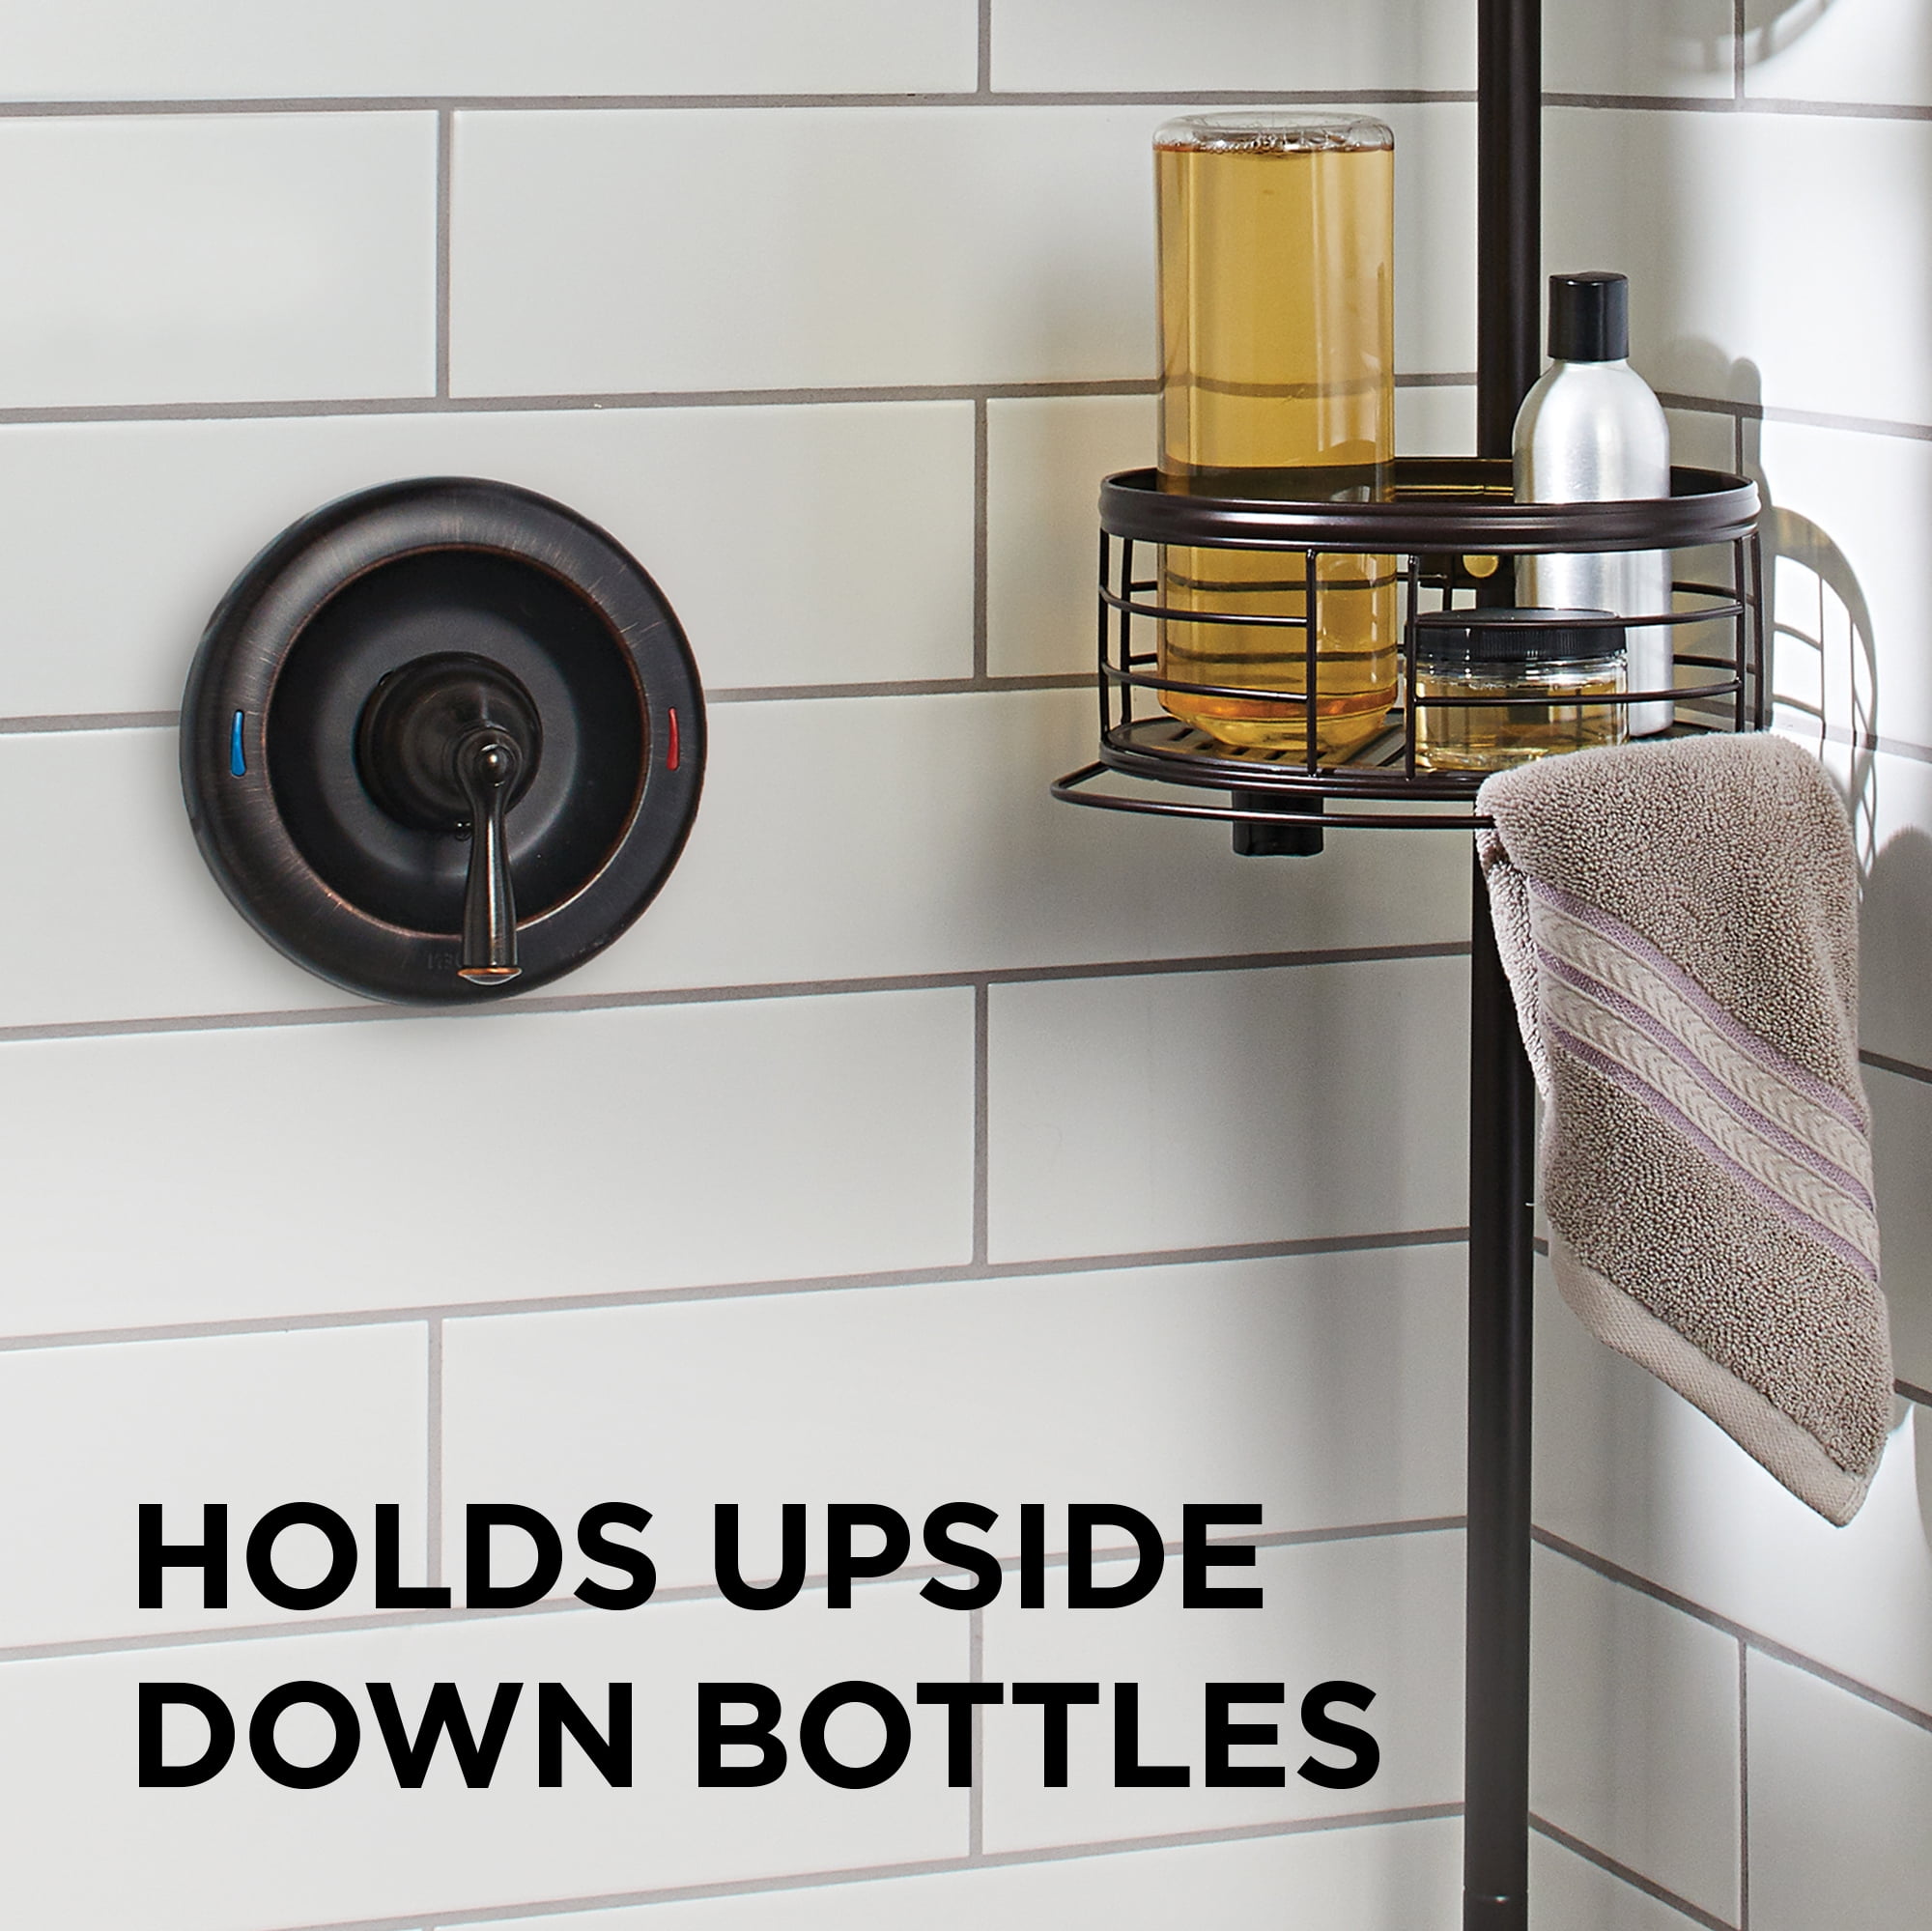 Luxurious Oil-Rubbed Bronze Tension Pole Shower Caddy - Maximum